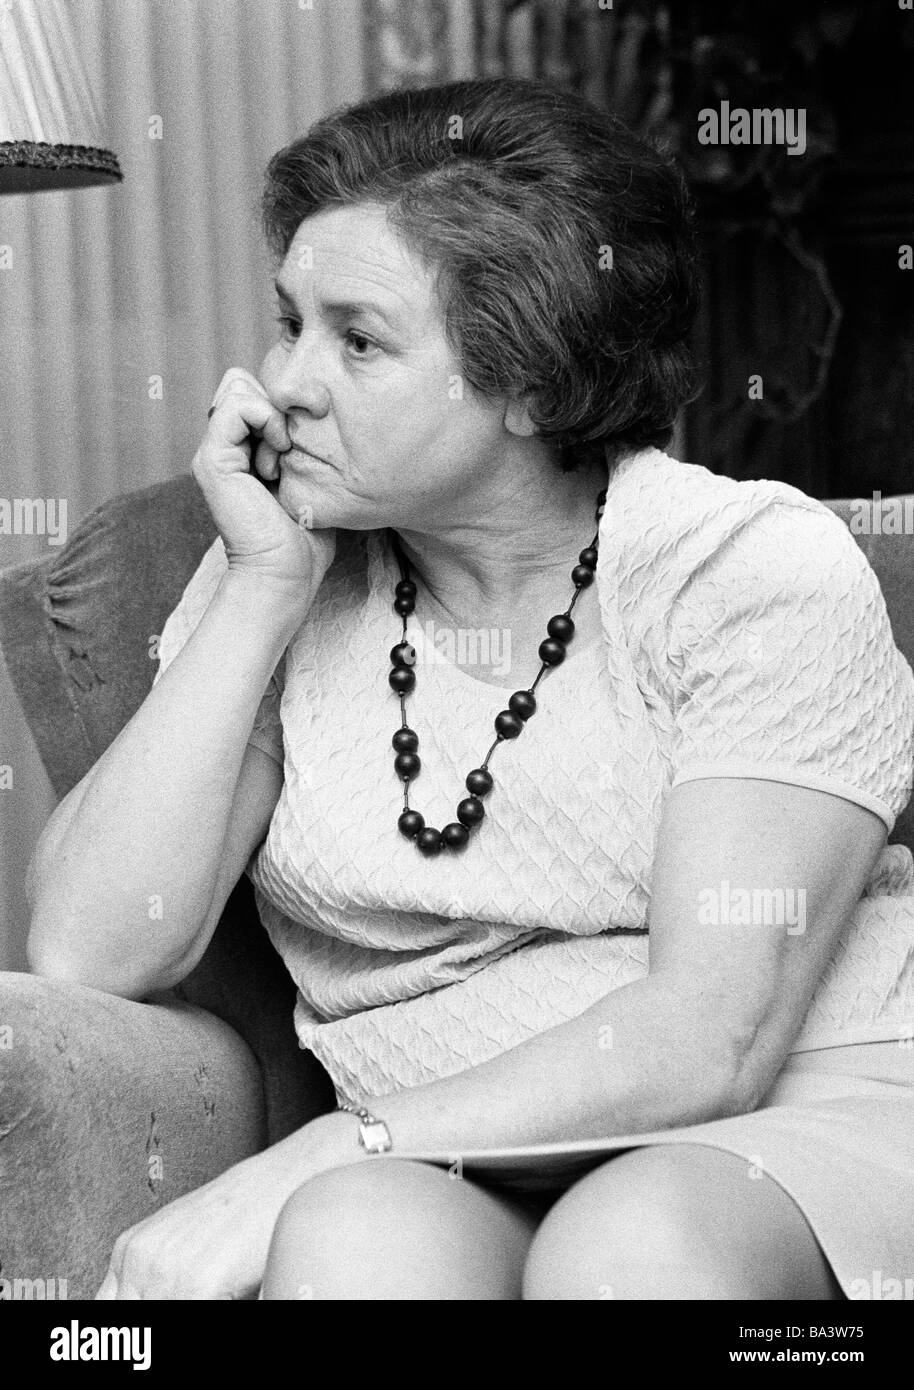 Sixties, black and white photo, people, senior, older woman sits